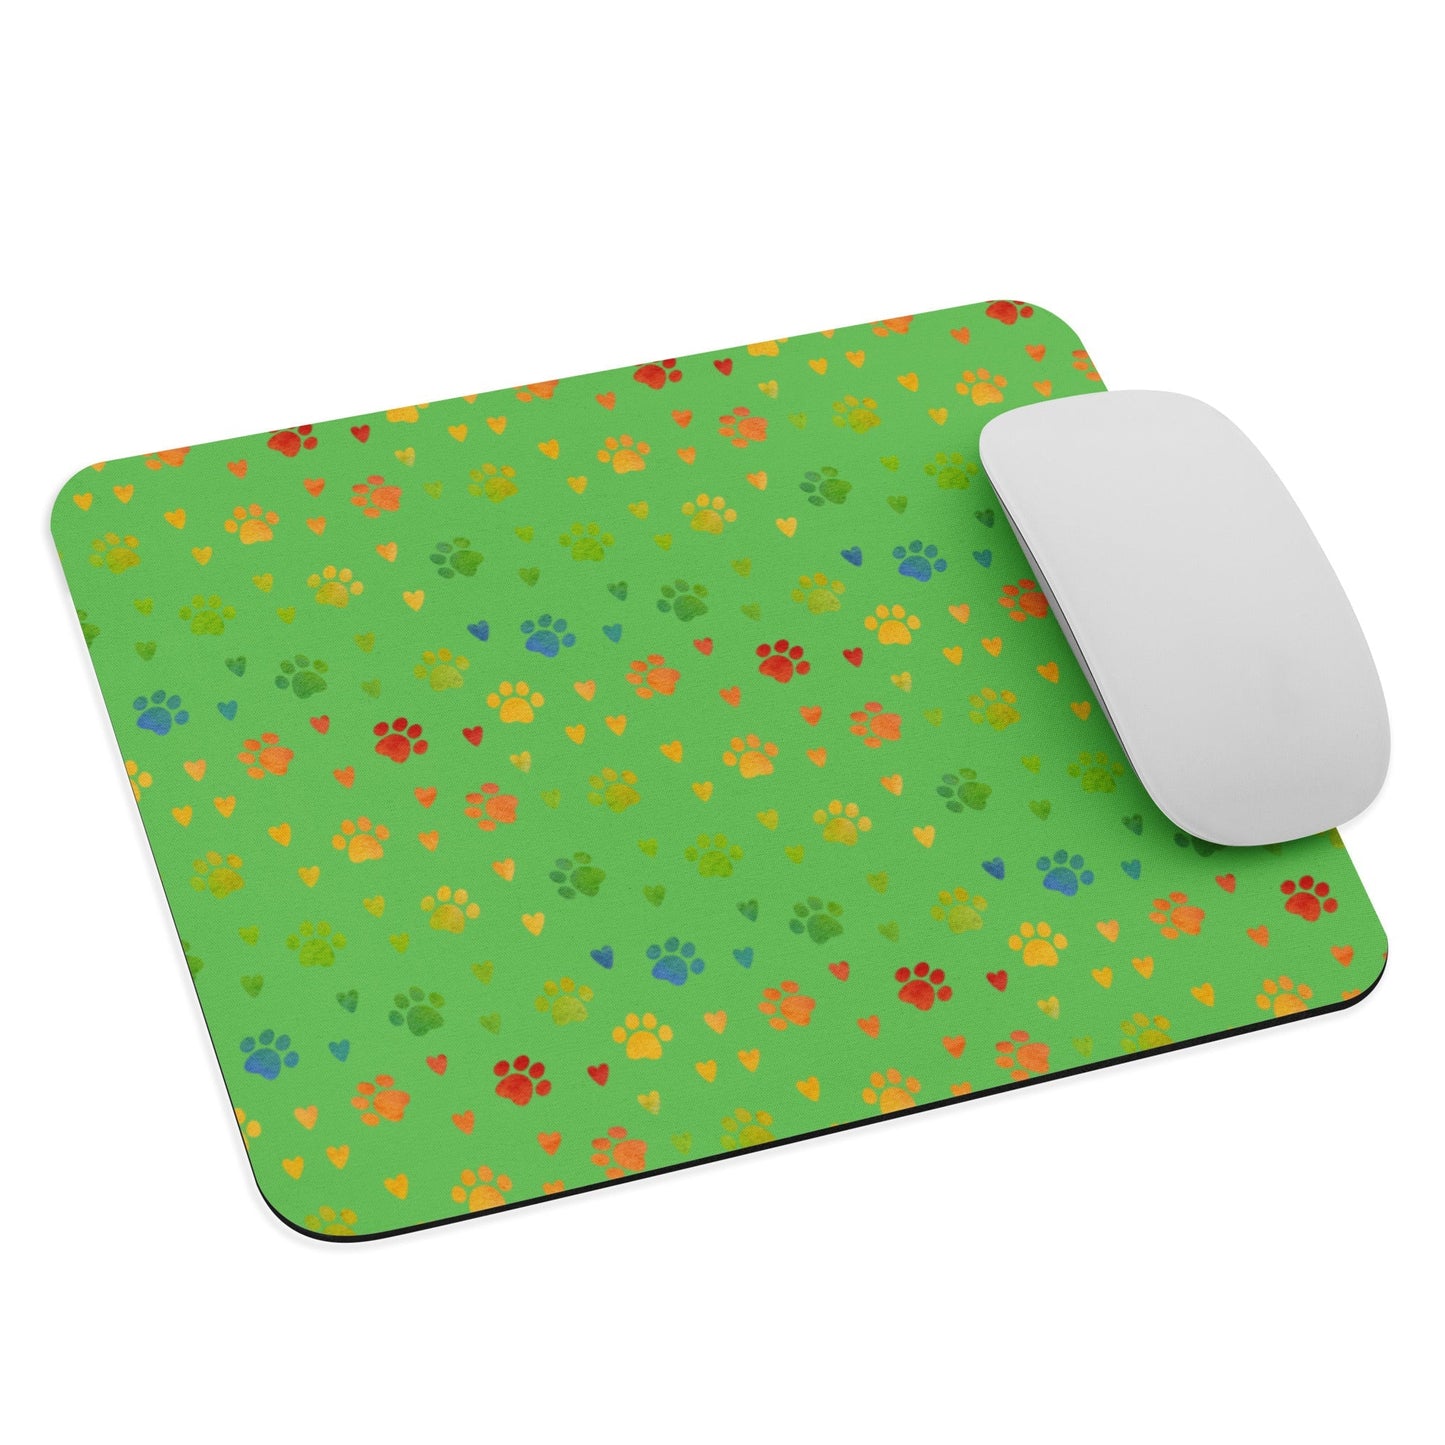 Green Paw Prints Mouse Pad - DoggyLoveandMore